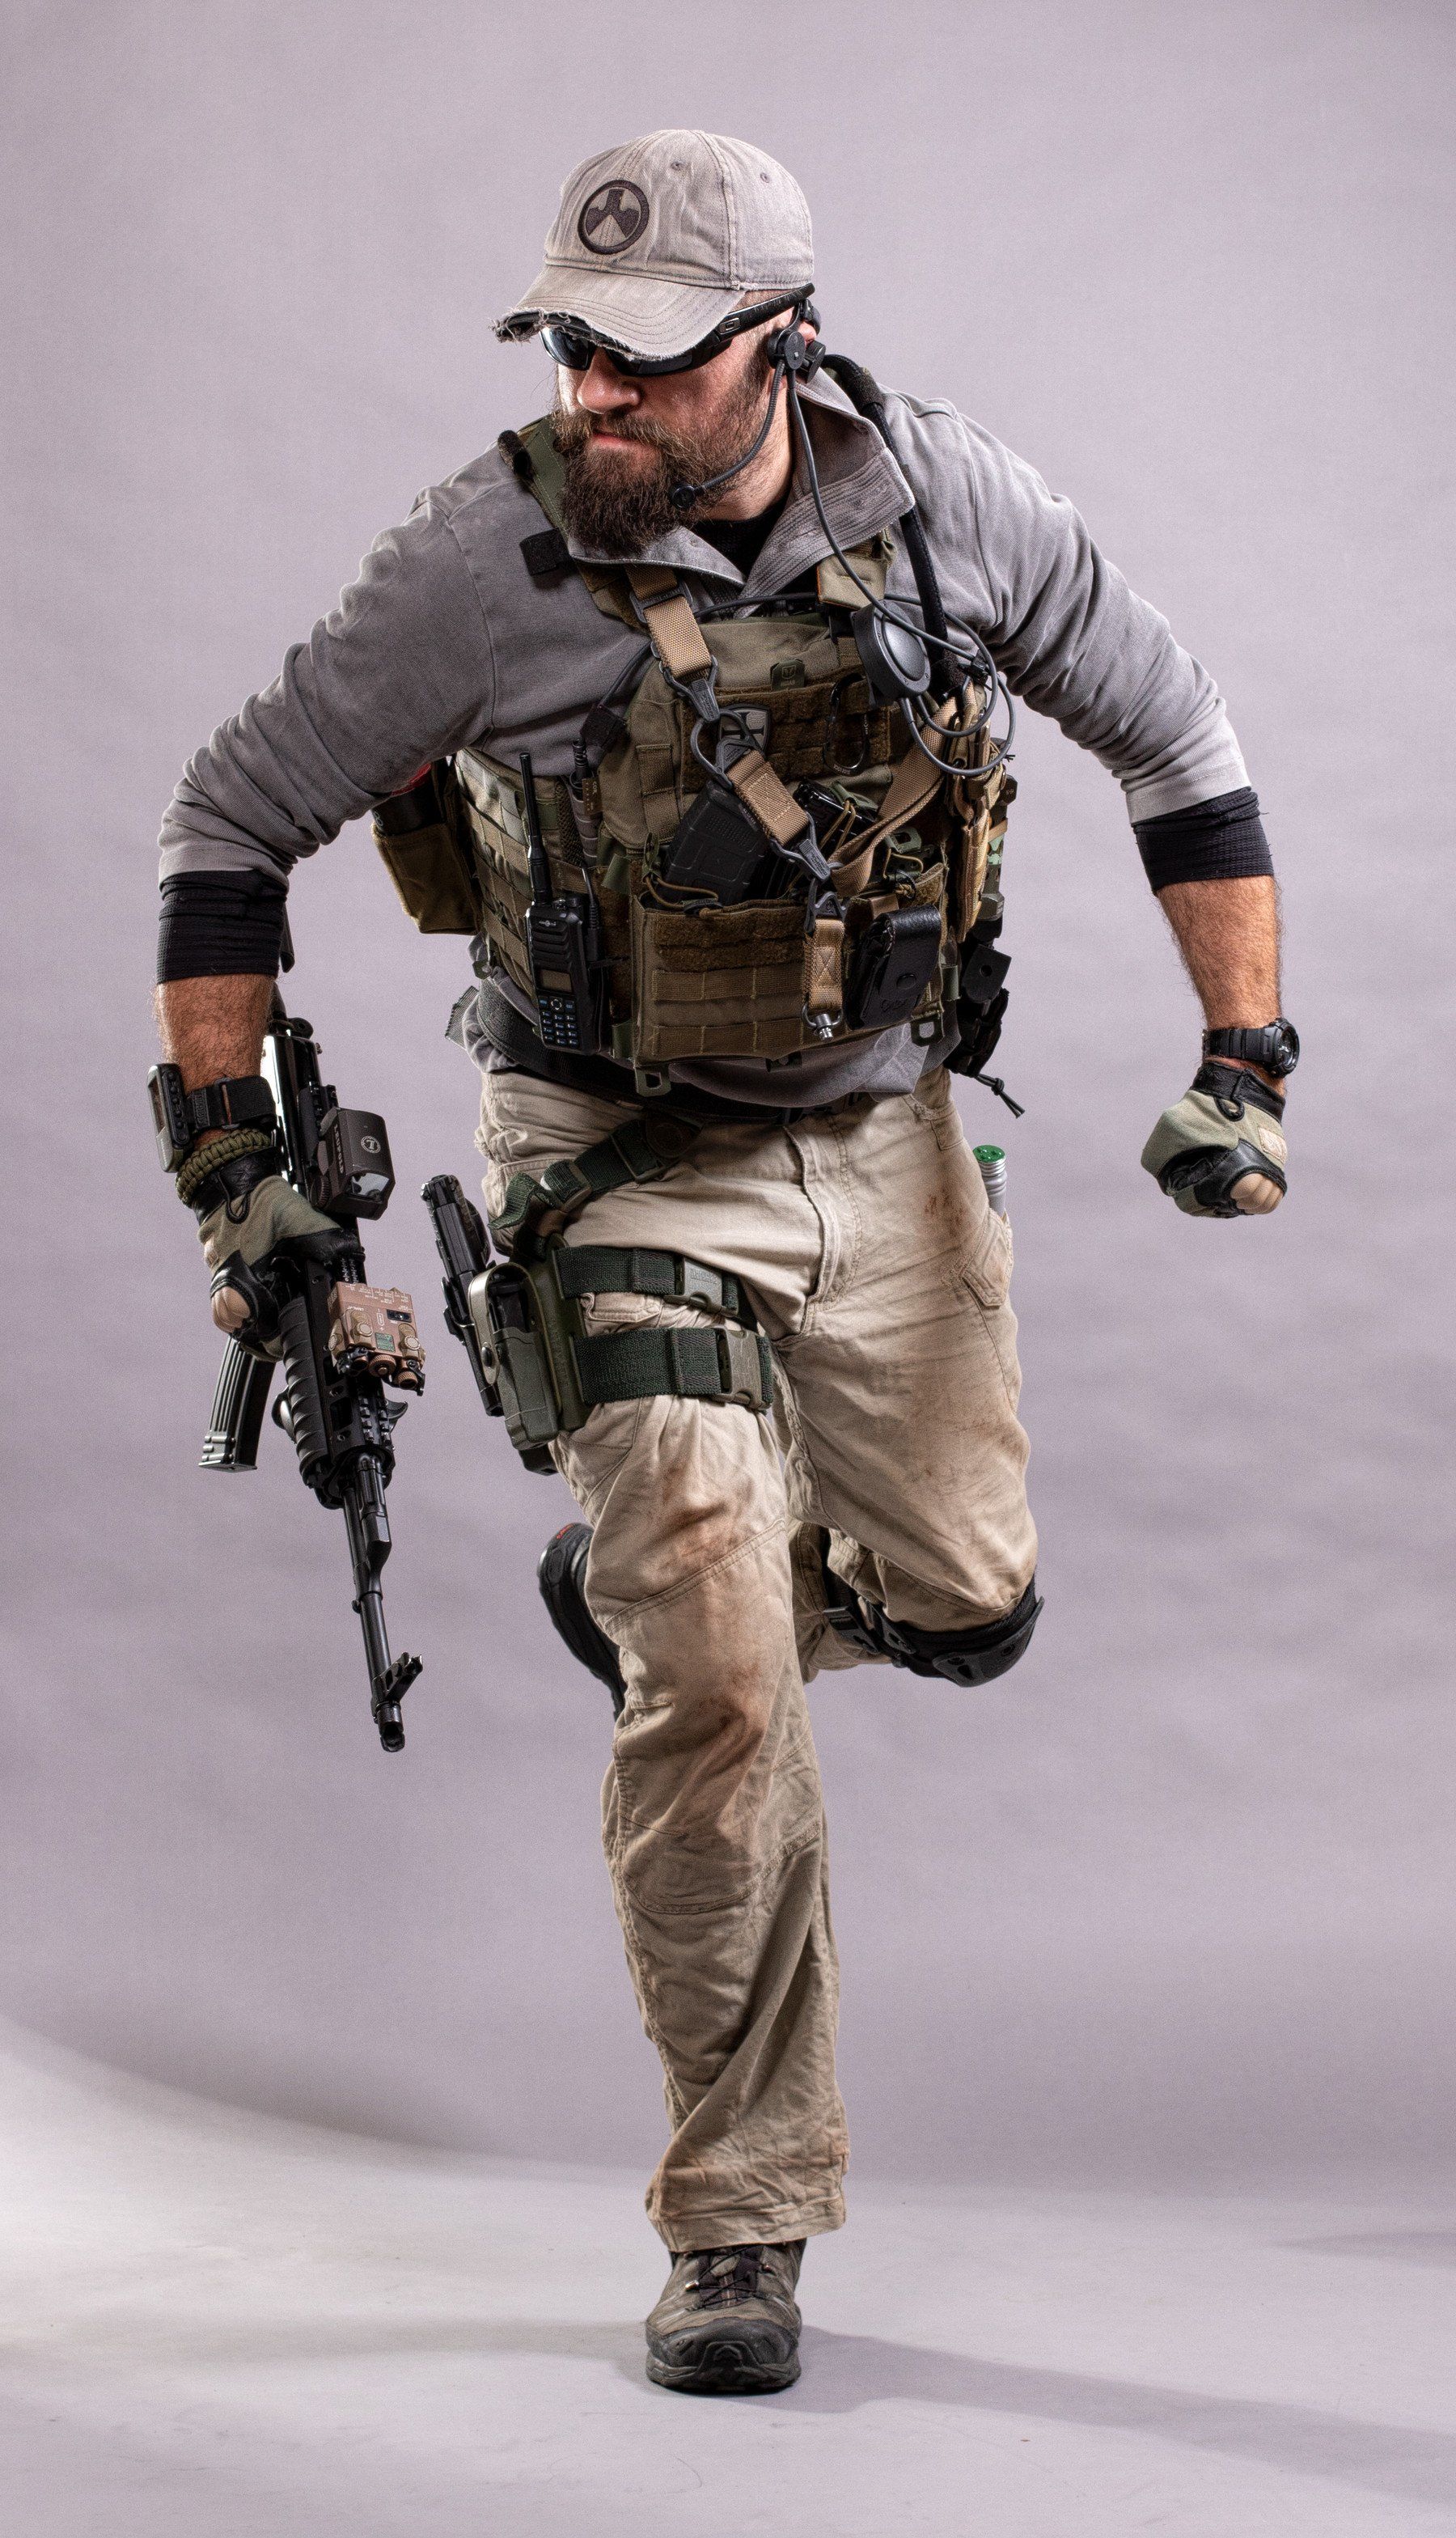 POSE REFERENCE PACK WARRIOR / MERCENARY. Resources. Military gear tactical, Guns pose, Military picture